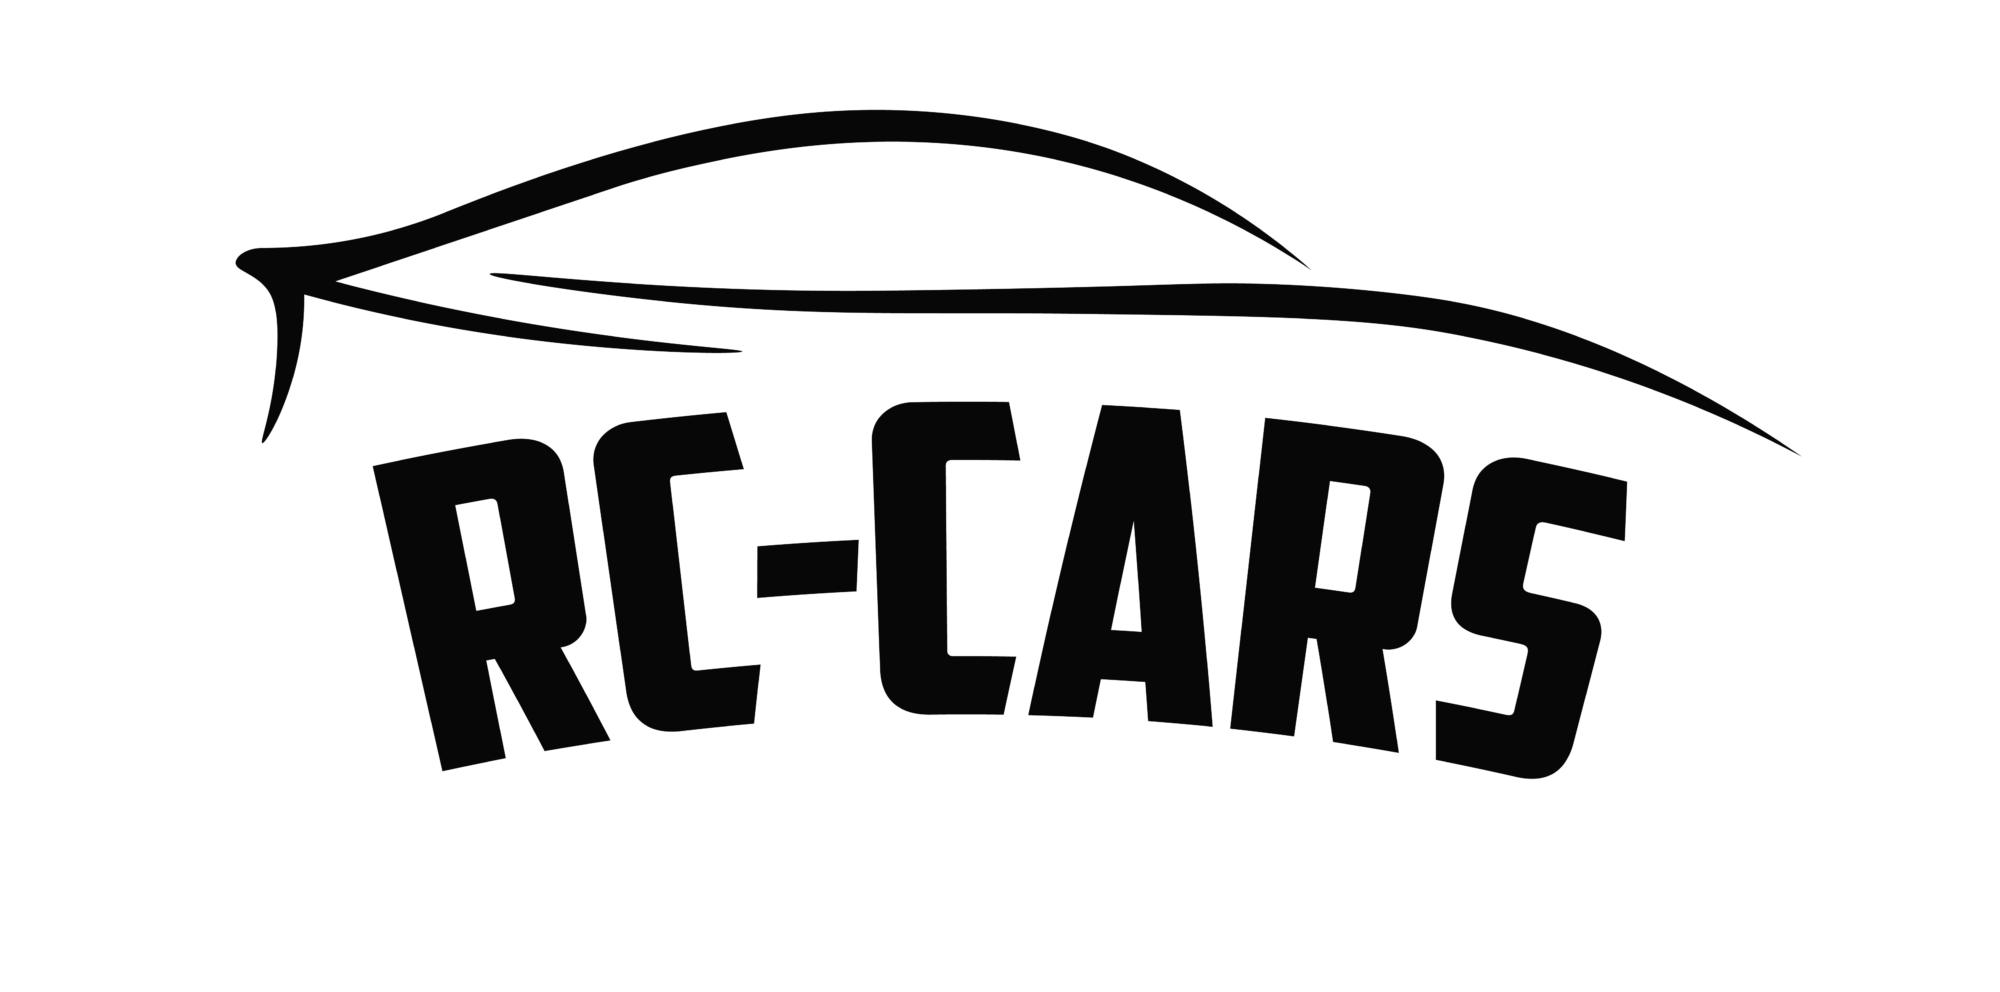 RC-CARS - luxury and premium cars - www.rc-cars.pl